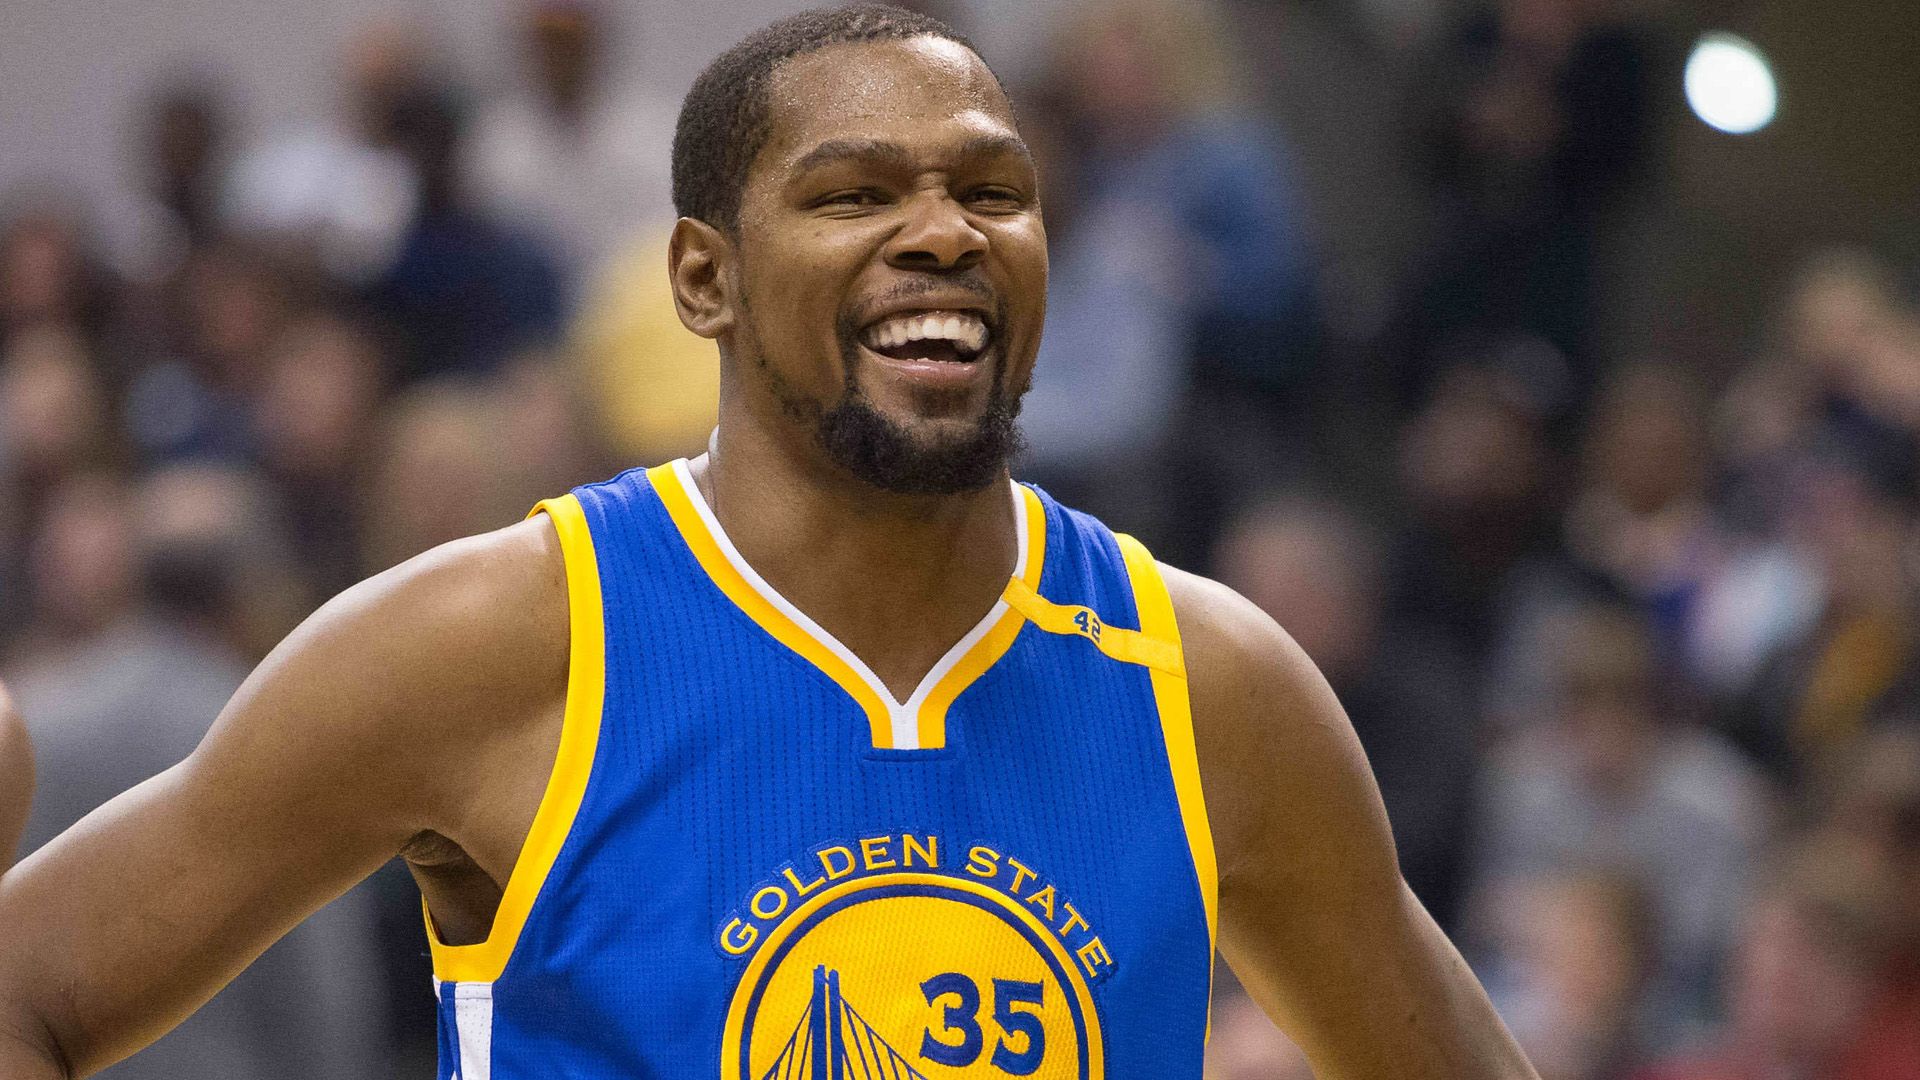 Kevin Durant Latest Best Pictures And Full Hd Wallpapers 1080p Fullhdwallpaper Net